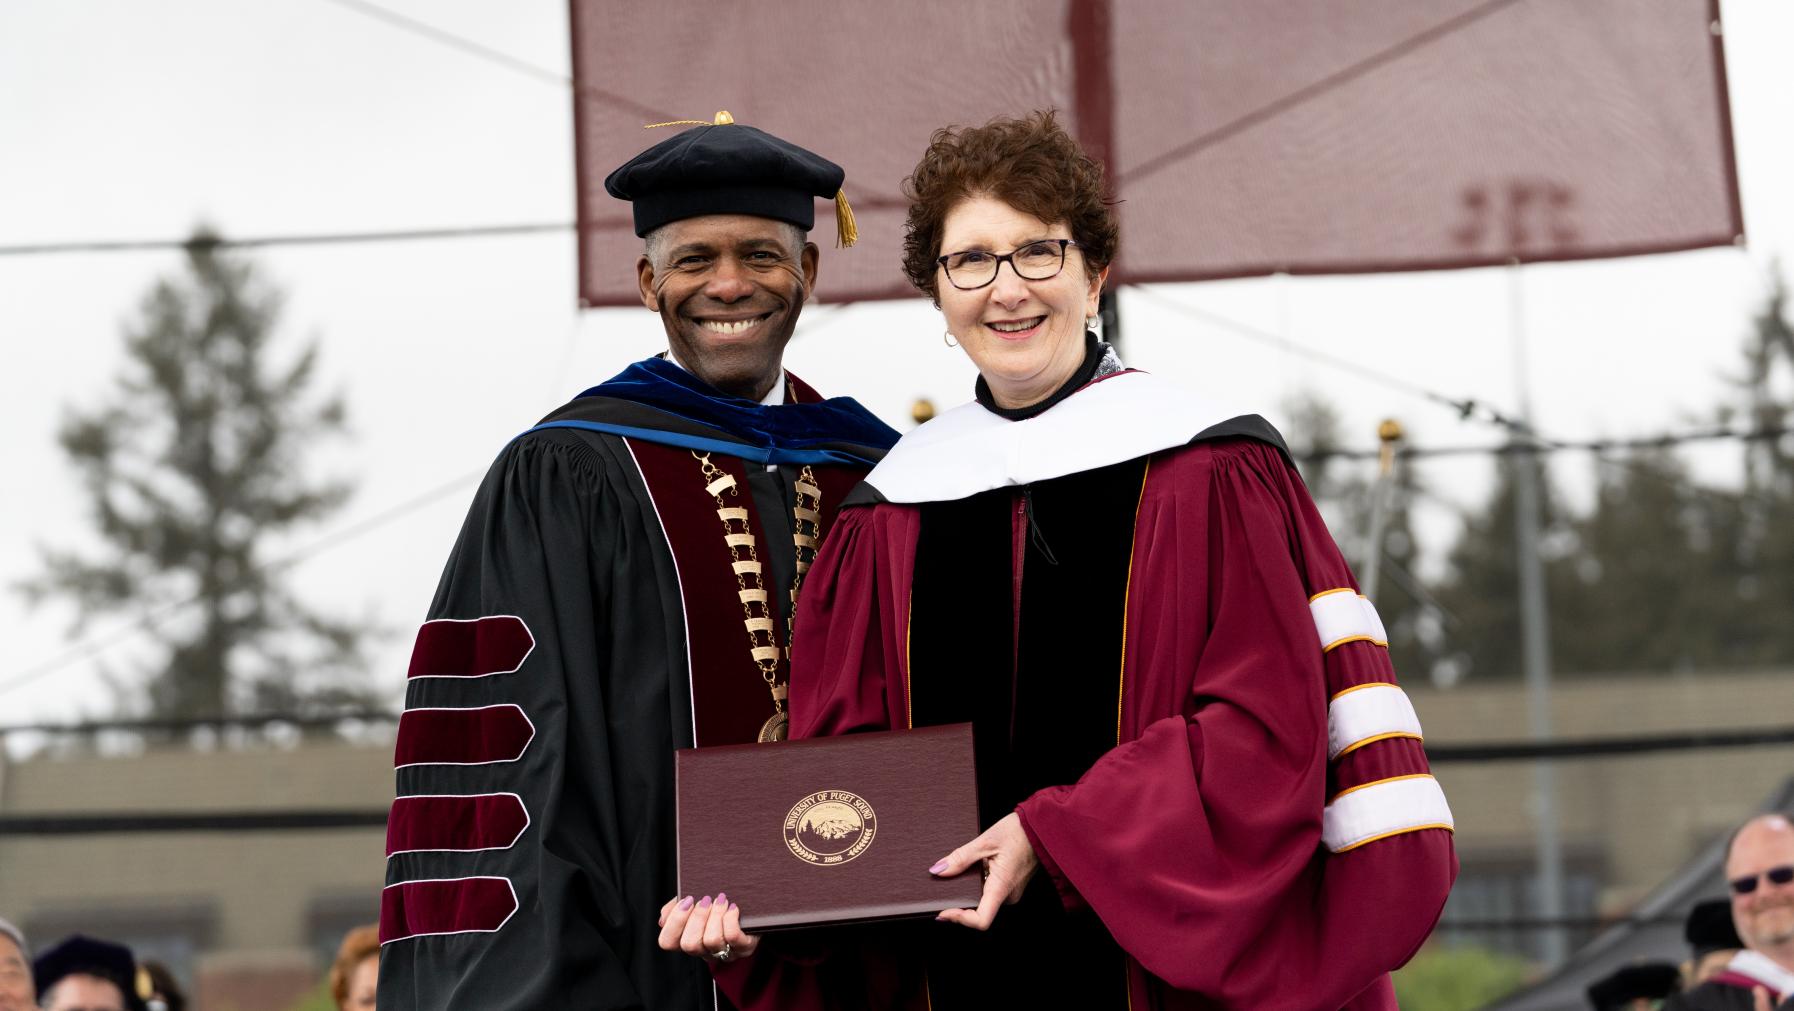 President Crawford presents an honorary degree.